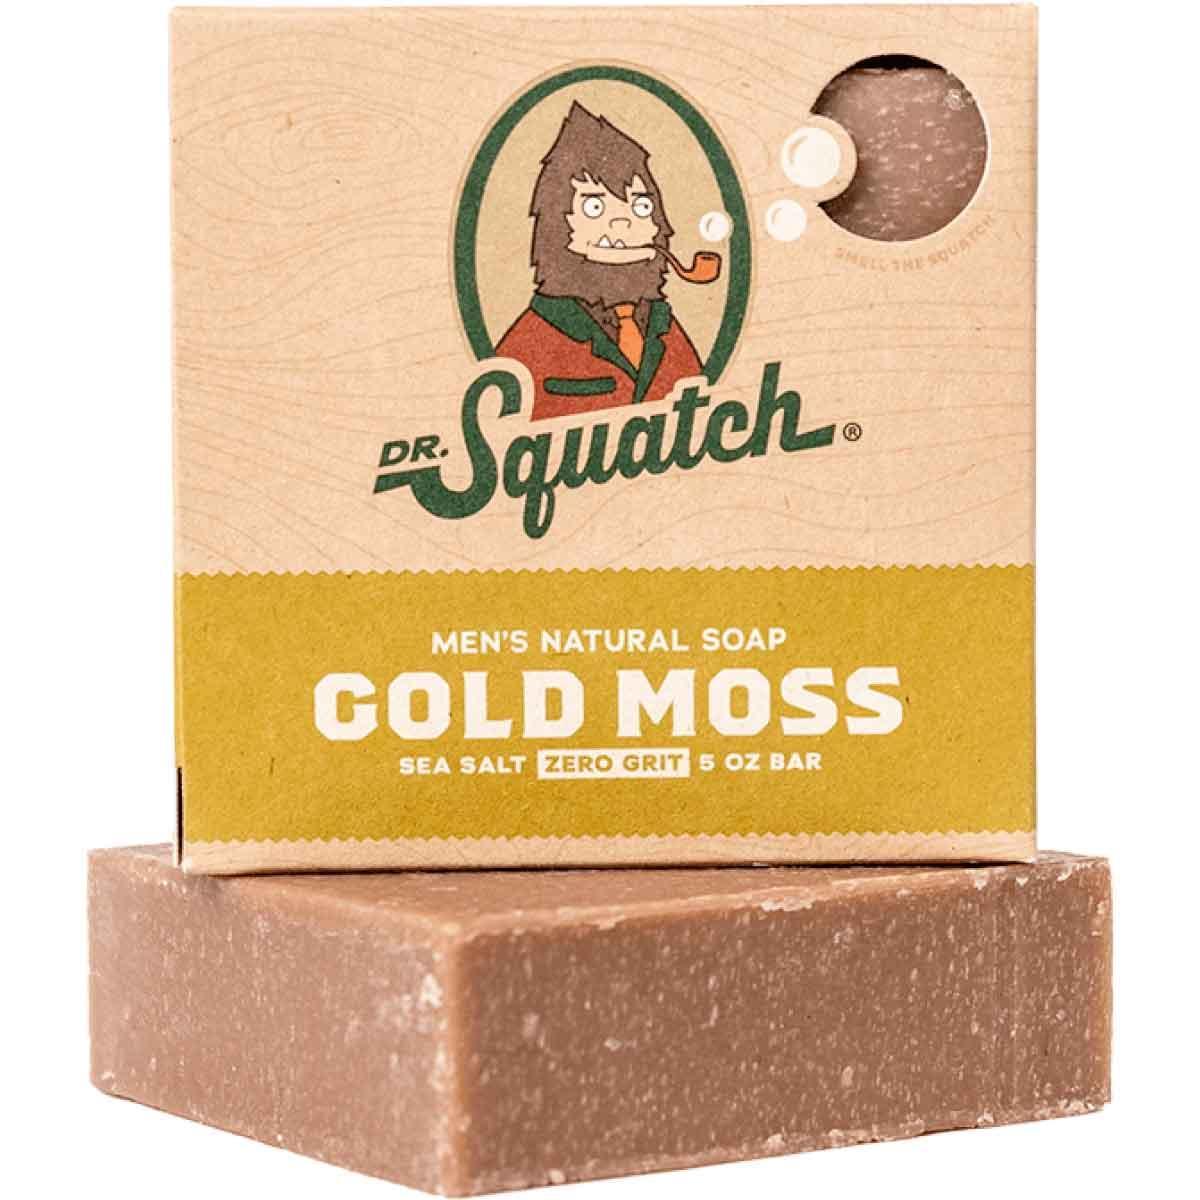 Dr. Squatch Manly Soap and Deodorant Variety Pack - Handmade with Organic  Oils Aluminum-Free - Birchwood Breeze and Fresh Falls